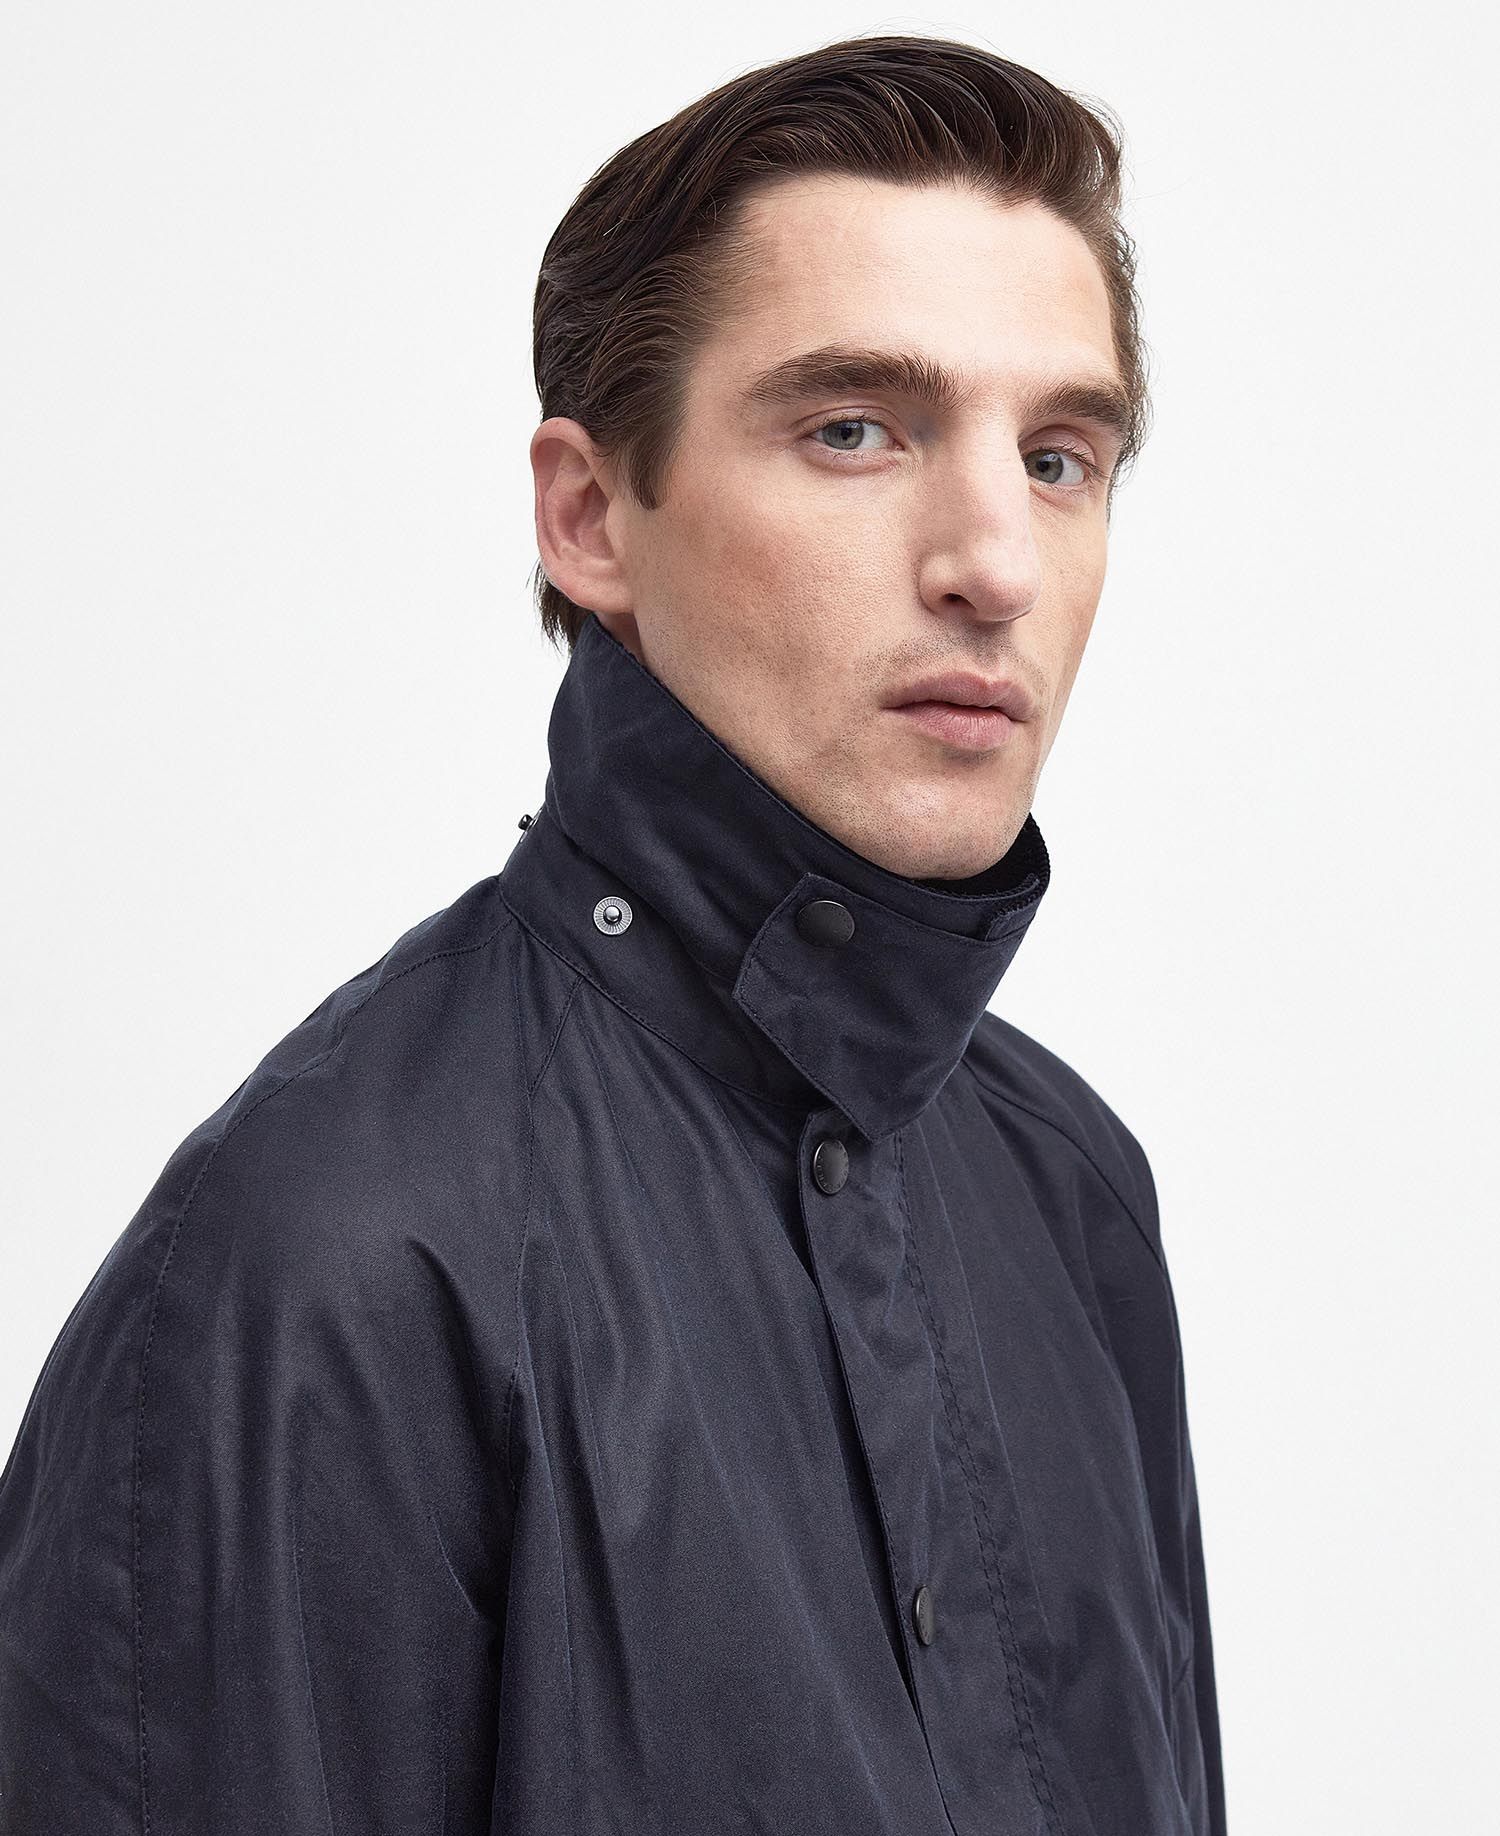 Barbour Ashby Wax Jacket in Navy | Barbour